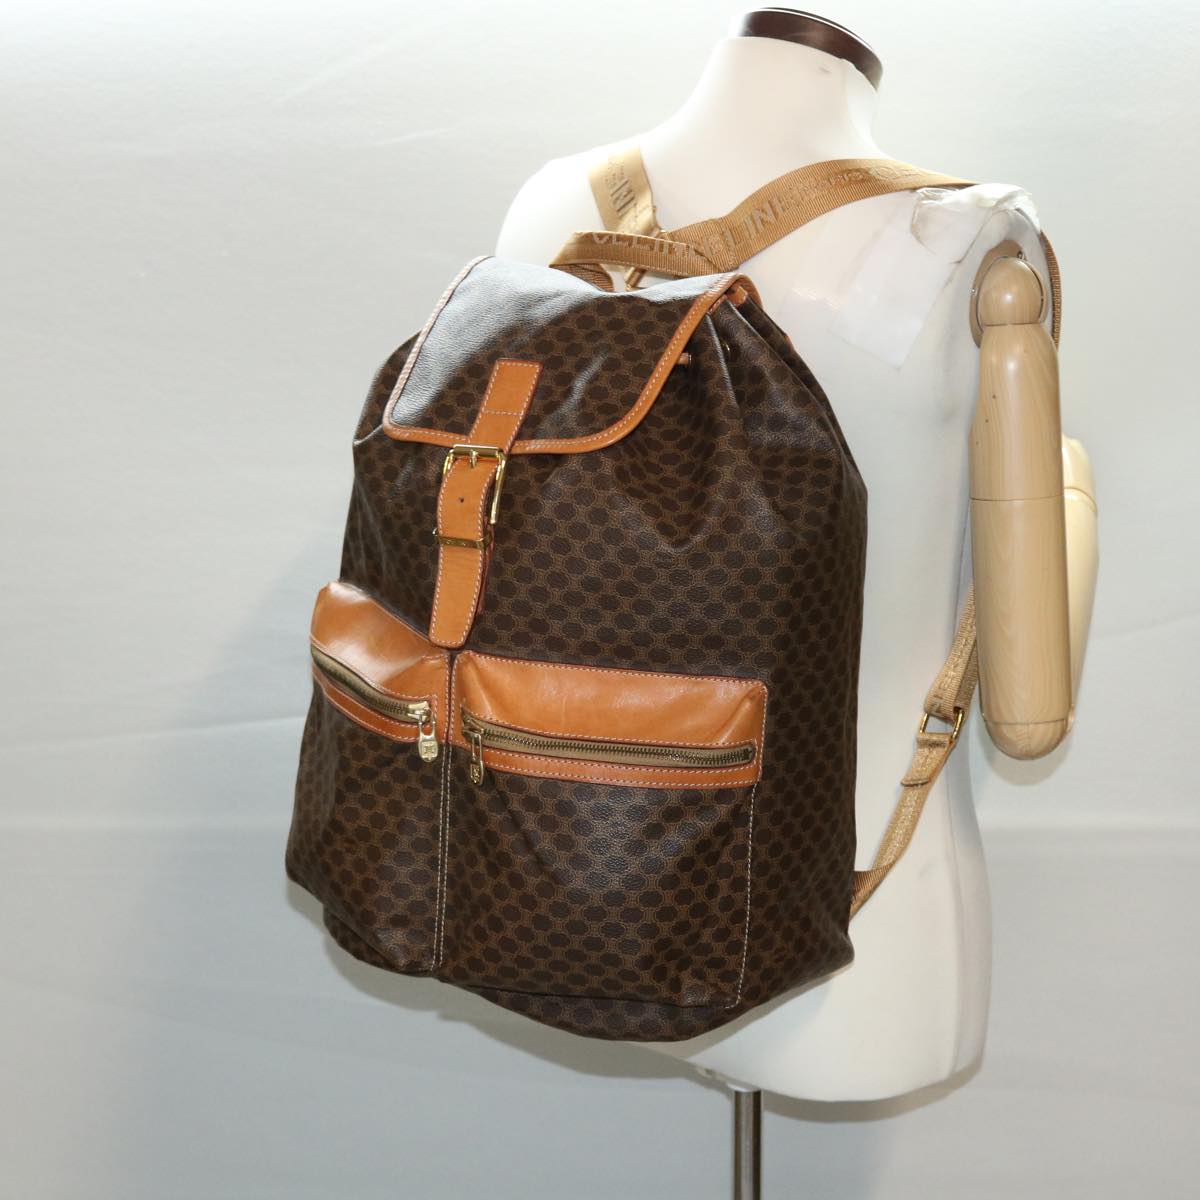 CELINE Macadam Canvas Backpack PVC Leather Brown Auth 40328